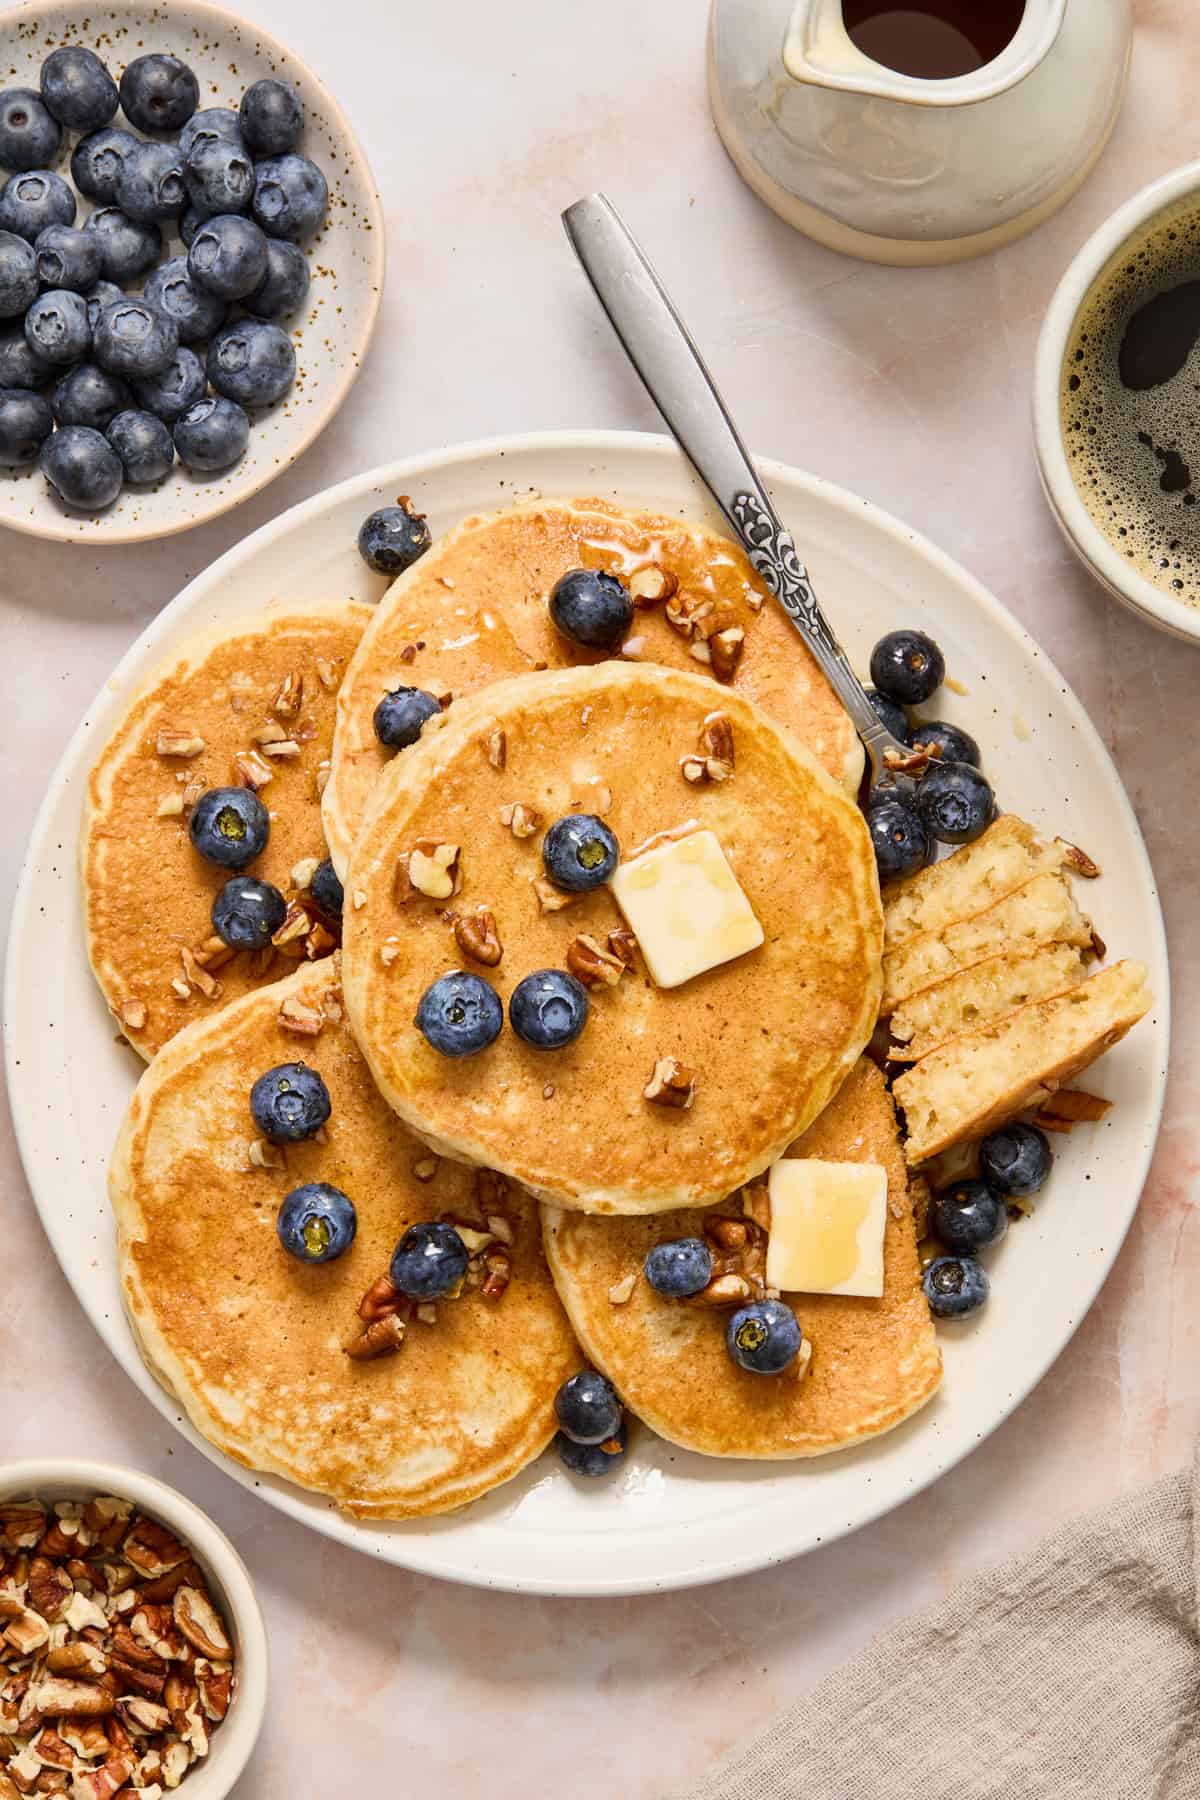 Plate with extra thick and fluffy pancakes with fork holding cut pancake pieces.